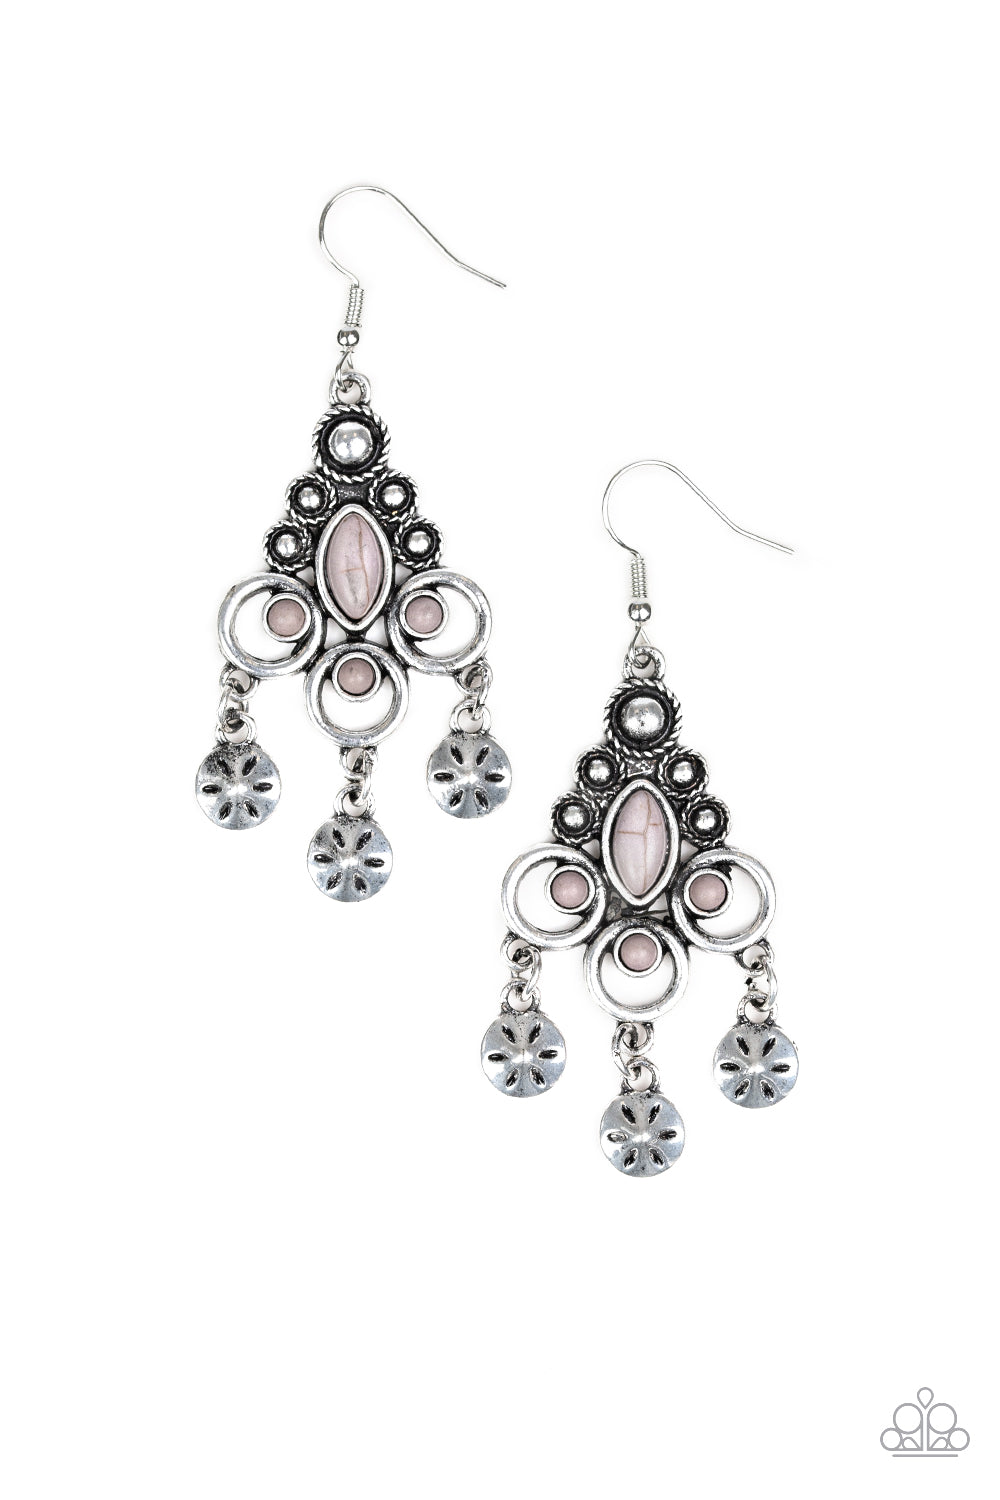 Southern Expressions - Silver Earrings